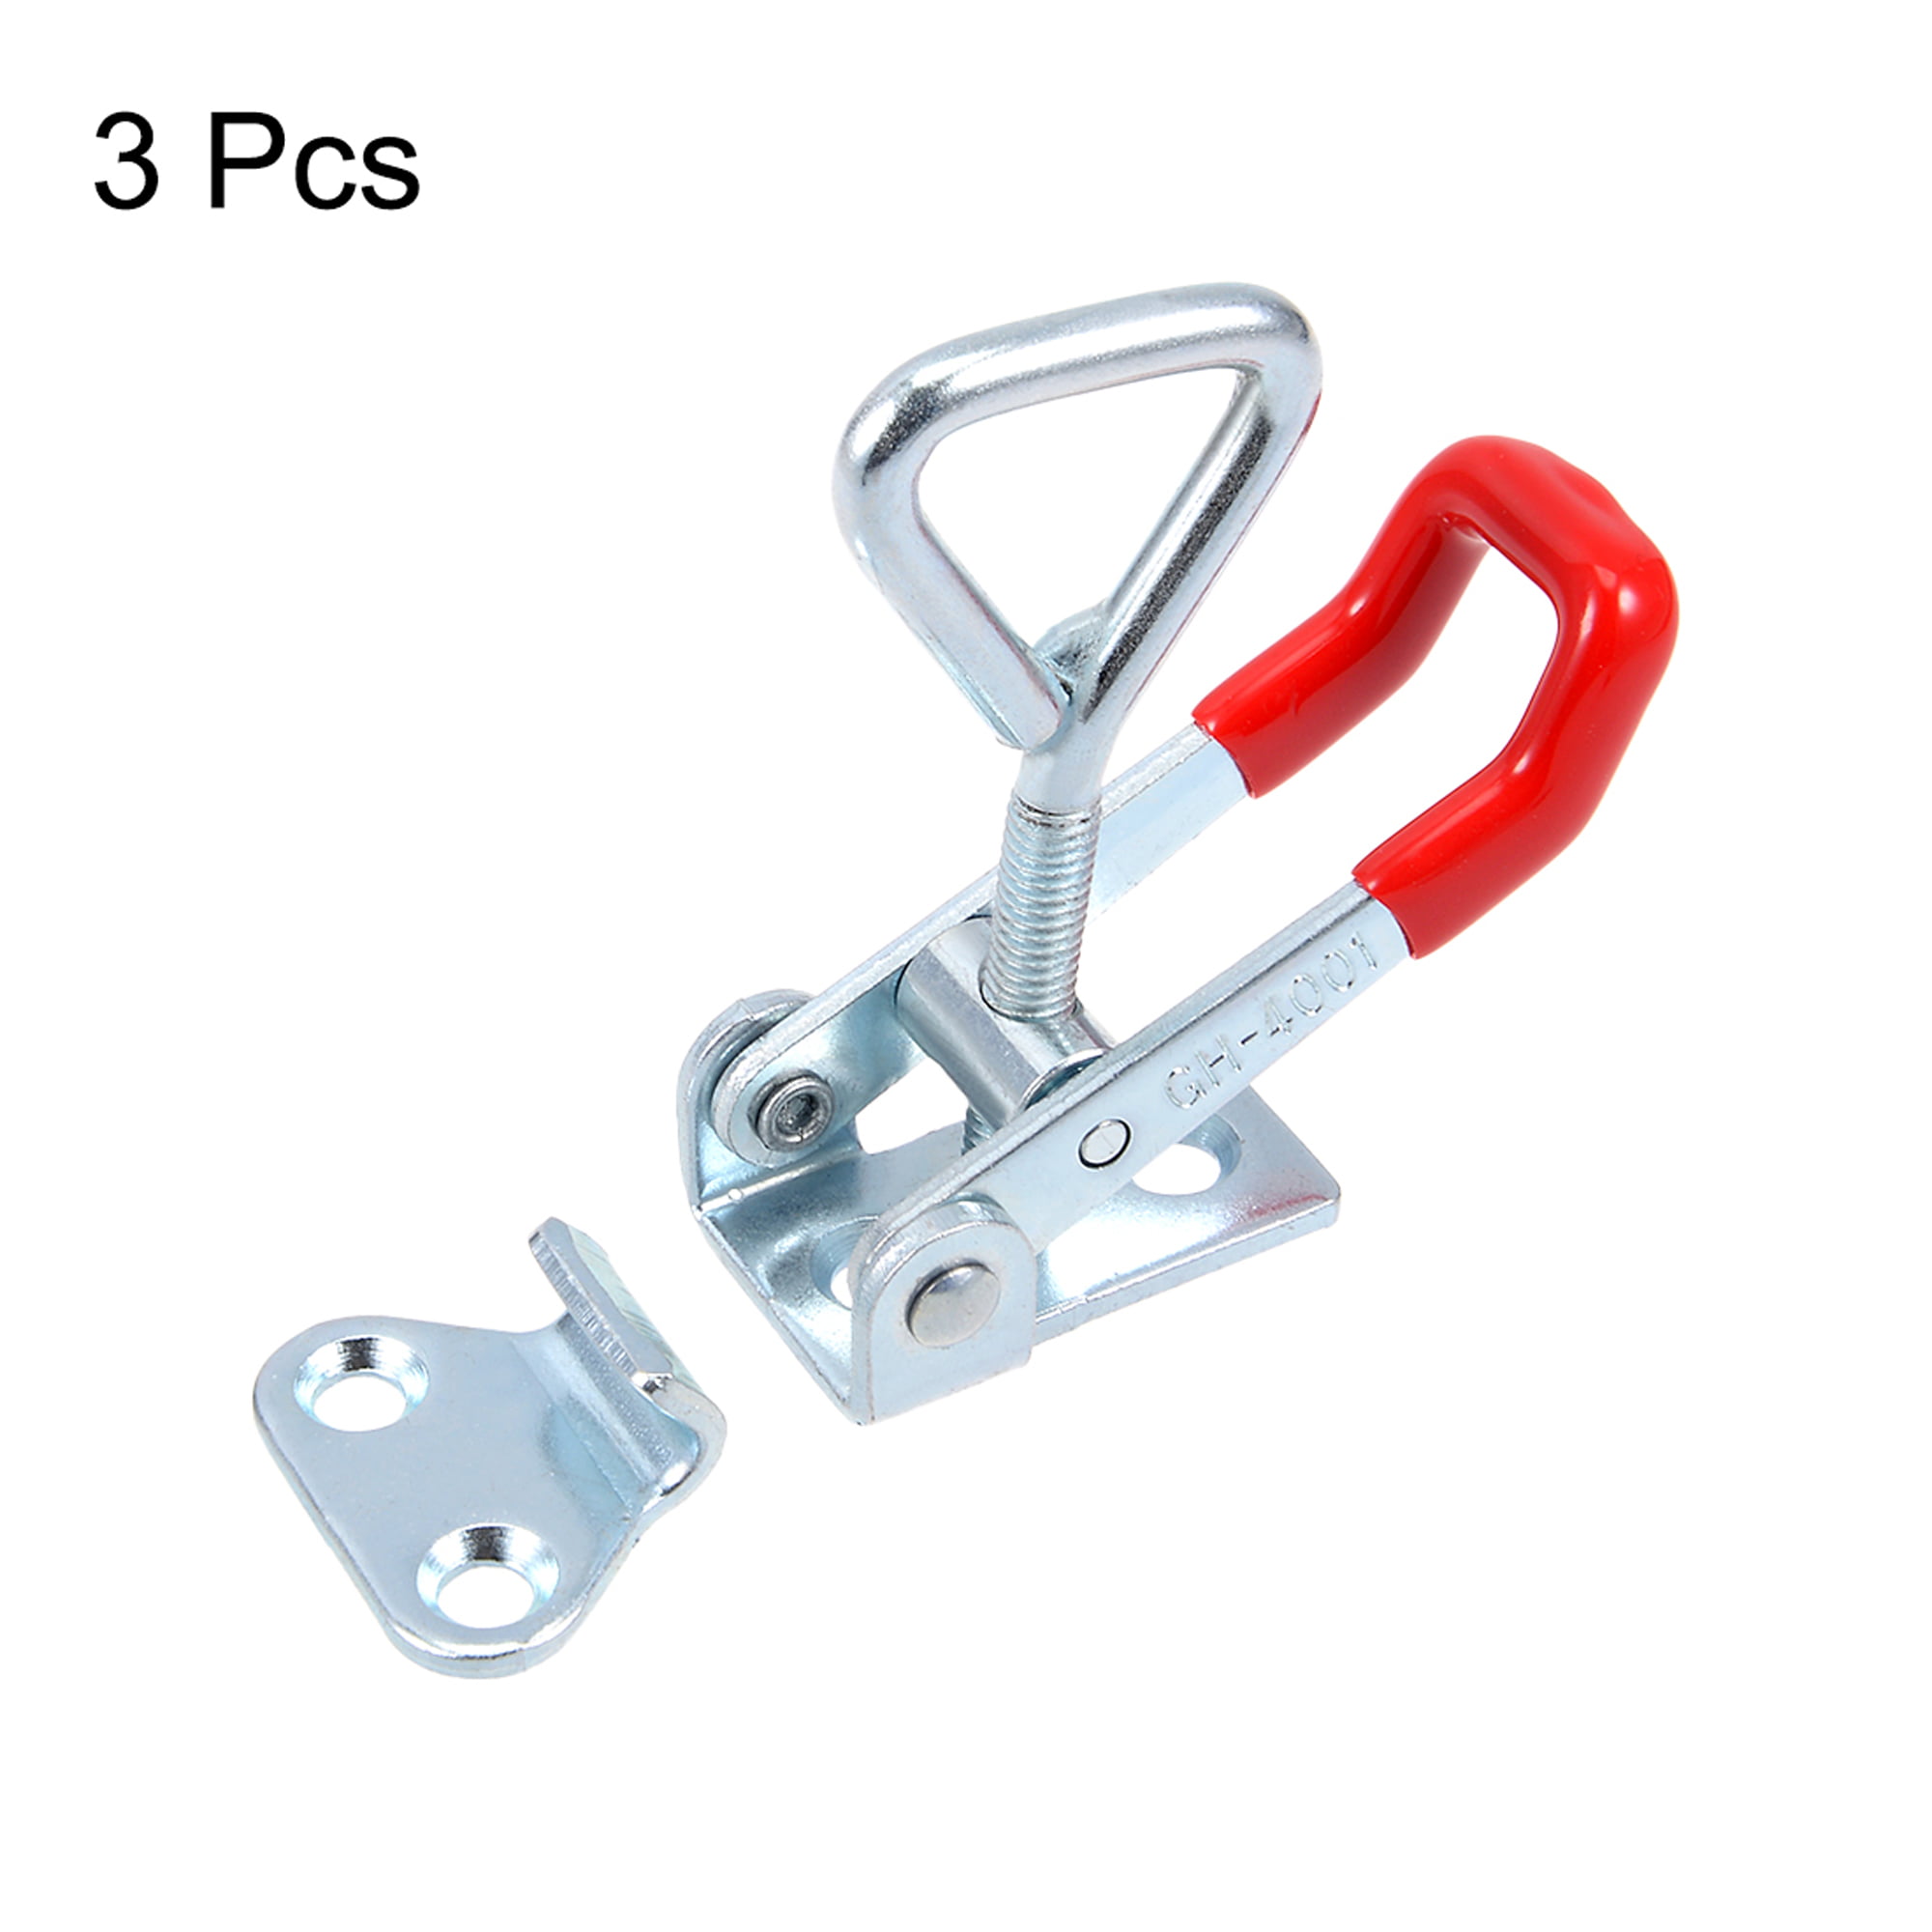 4 Pack Toggle Latch Clamp 4001 Hand Tool 330LB Heavy Duty Toggle Clamps 